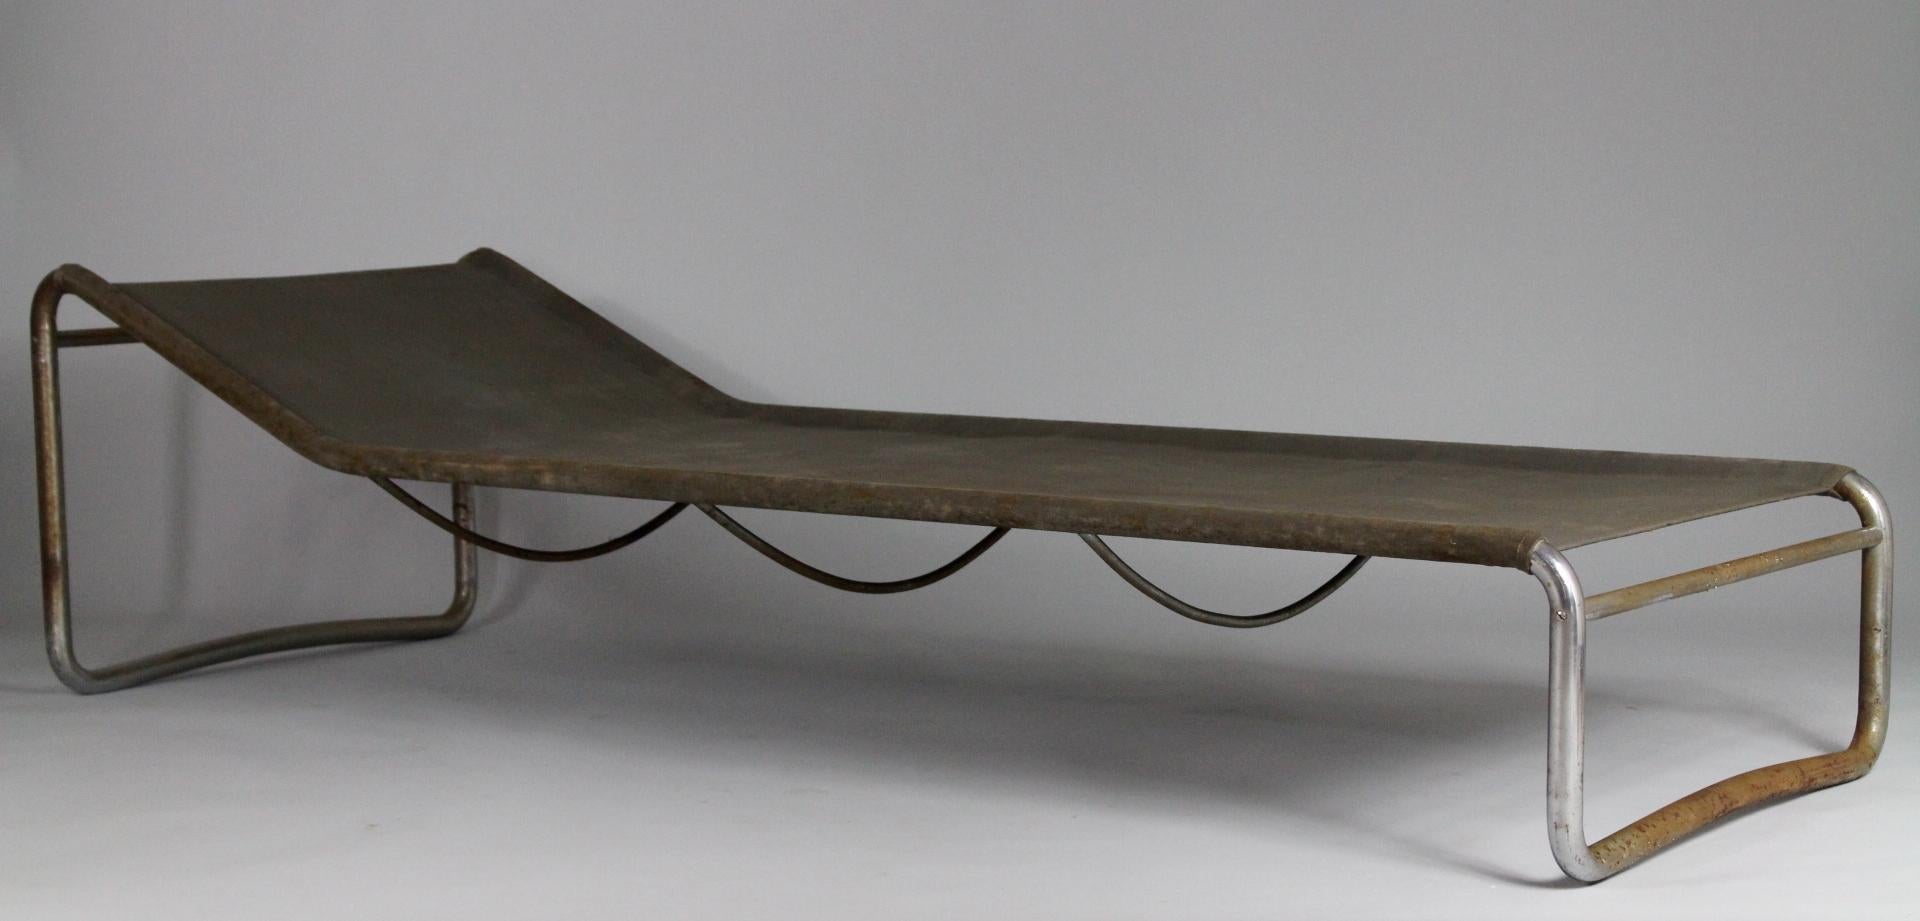 Tubular steel daybed from the 1930s with original iron thread fabric. Distressed chrome plating, fabric in good condition.